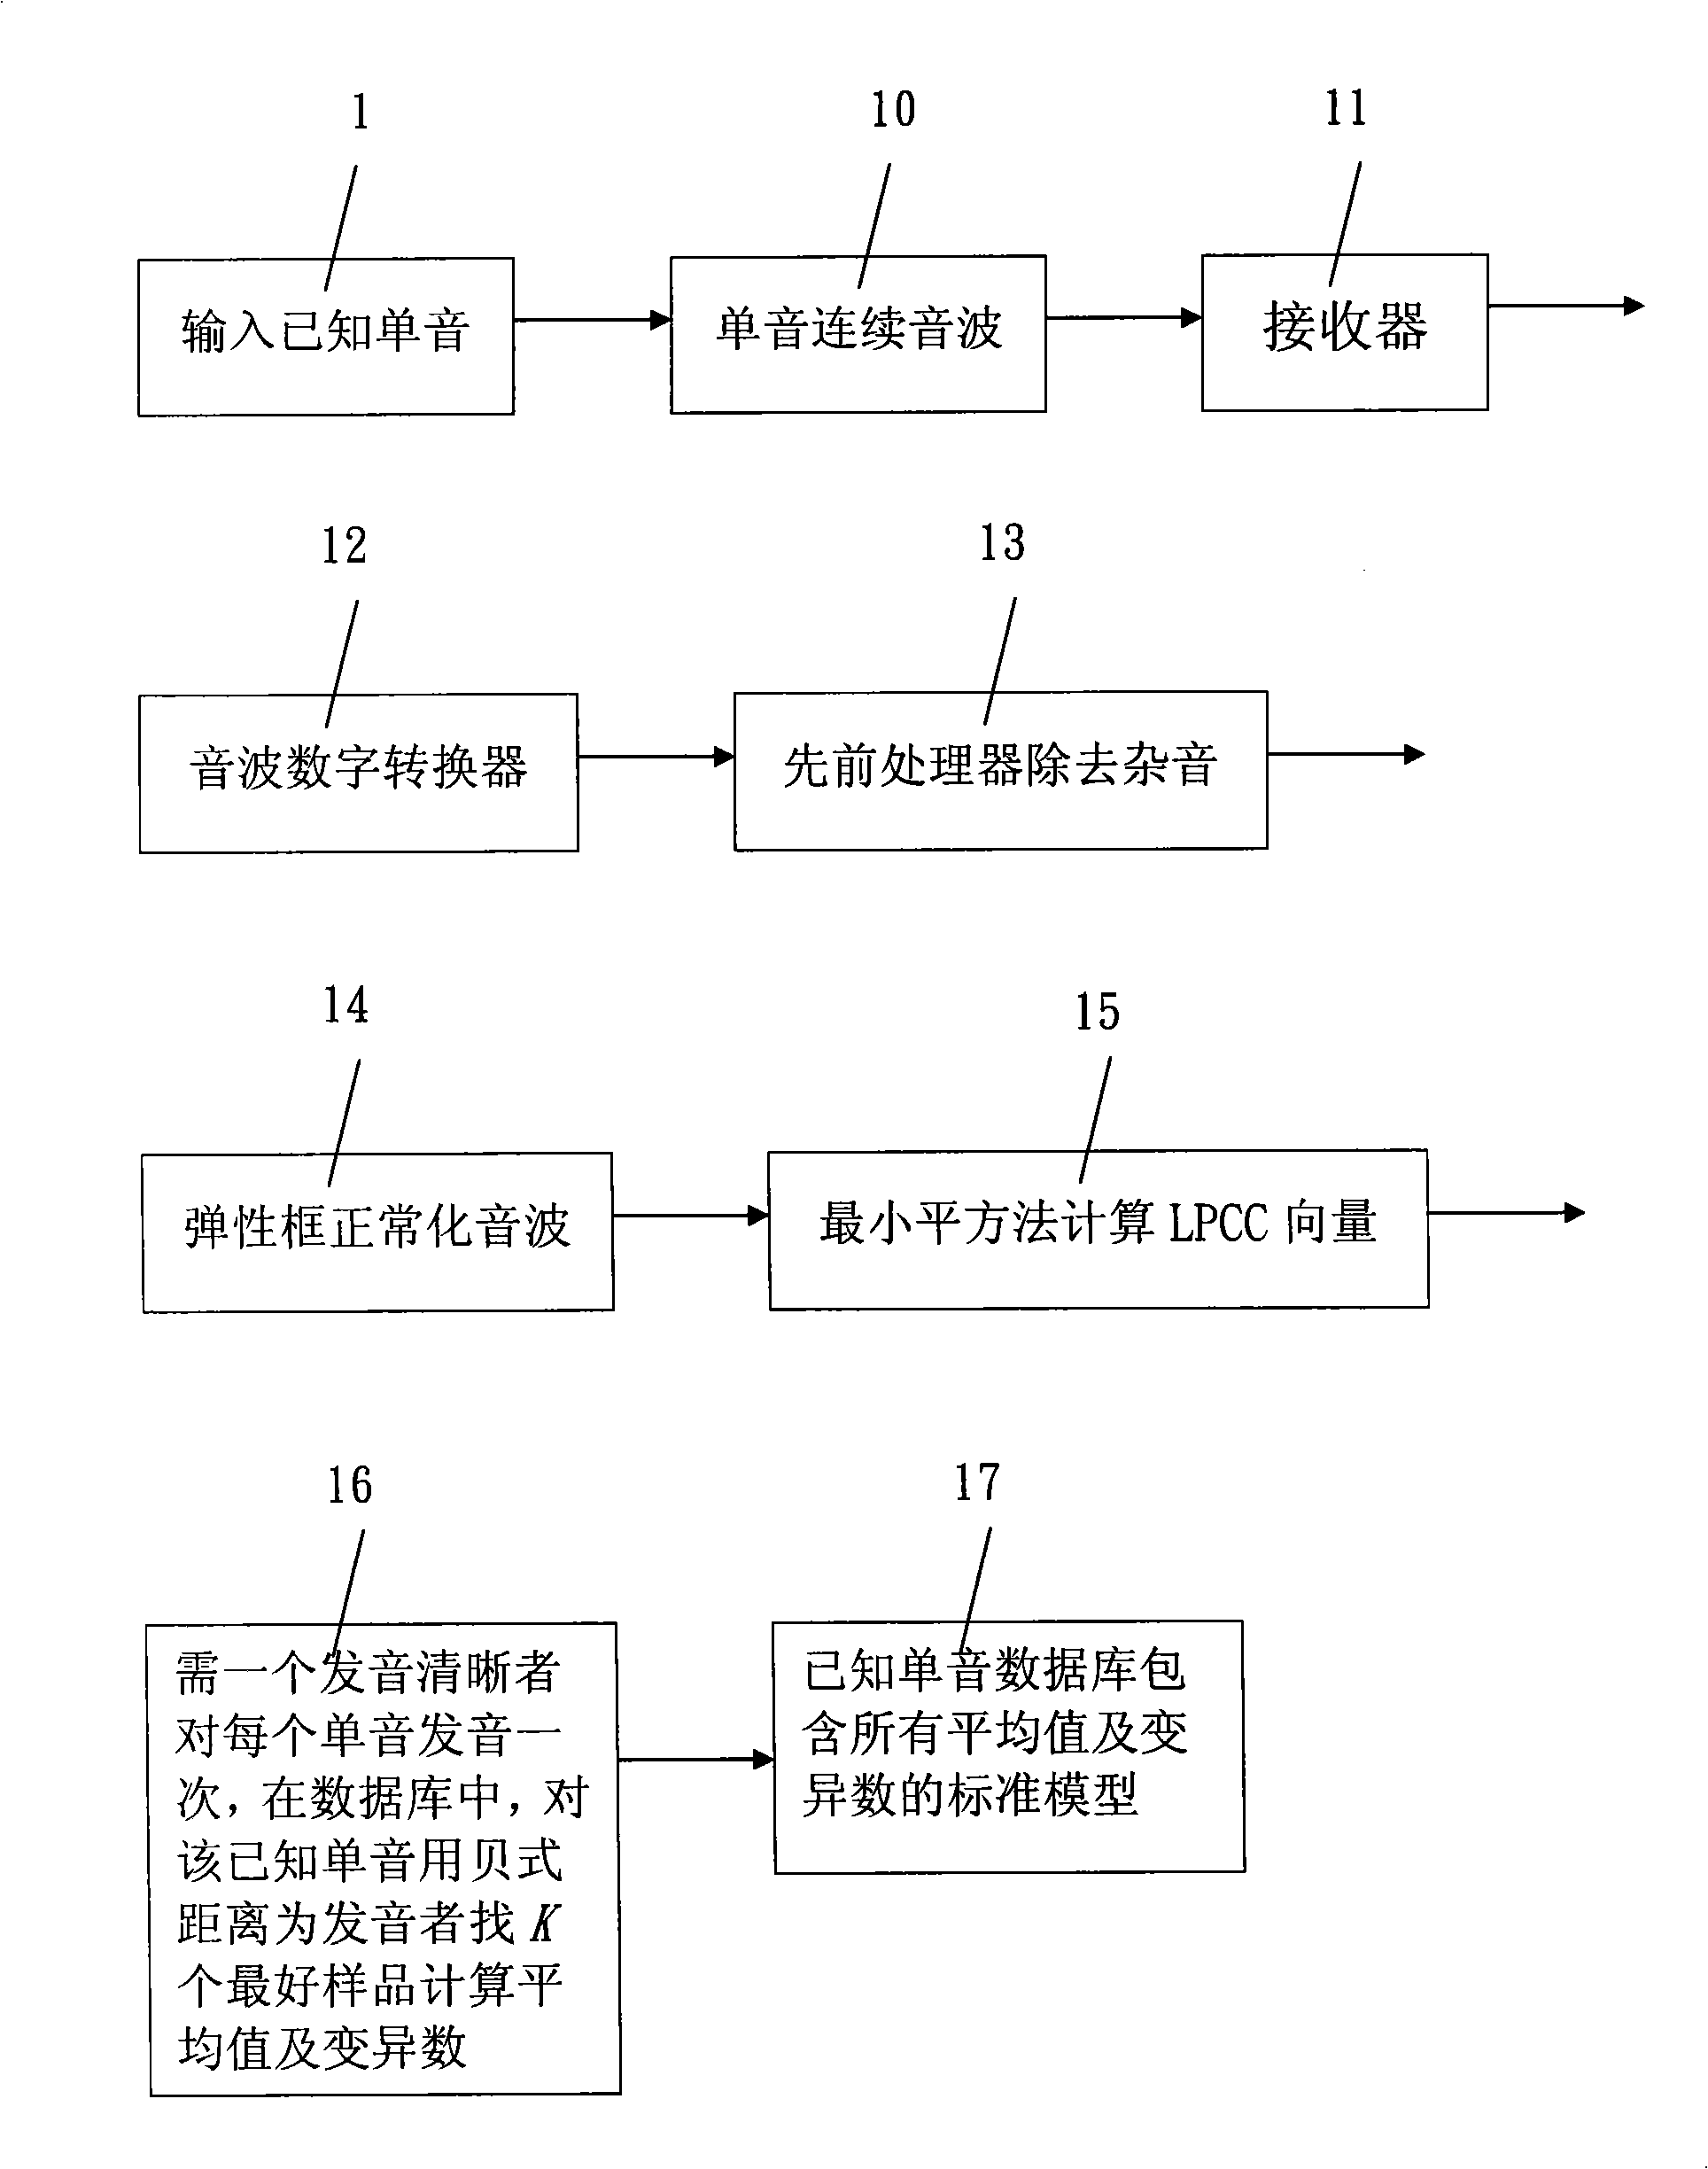 National language single tone recognizing system capable of wide application